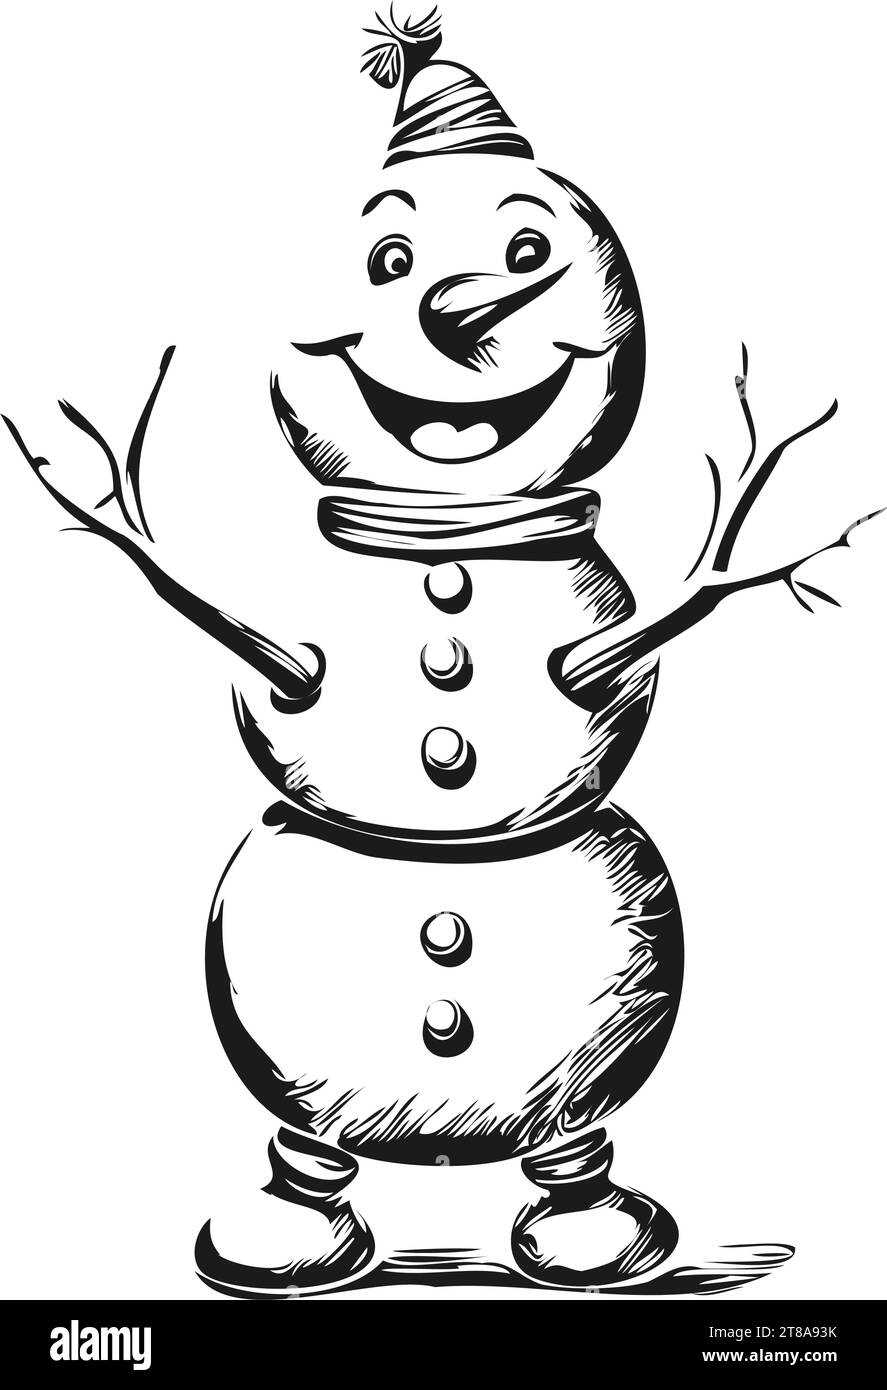 Snowman Vintage Engraved Sketch Detailed Illustration of Christmas Snowman, Classic Black and White, and Festive Imagery, black white isolated Vector Stock Vector